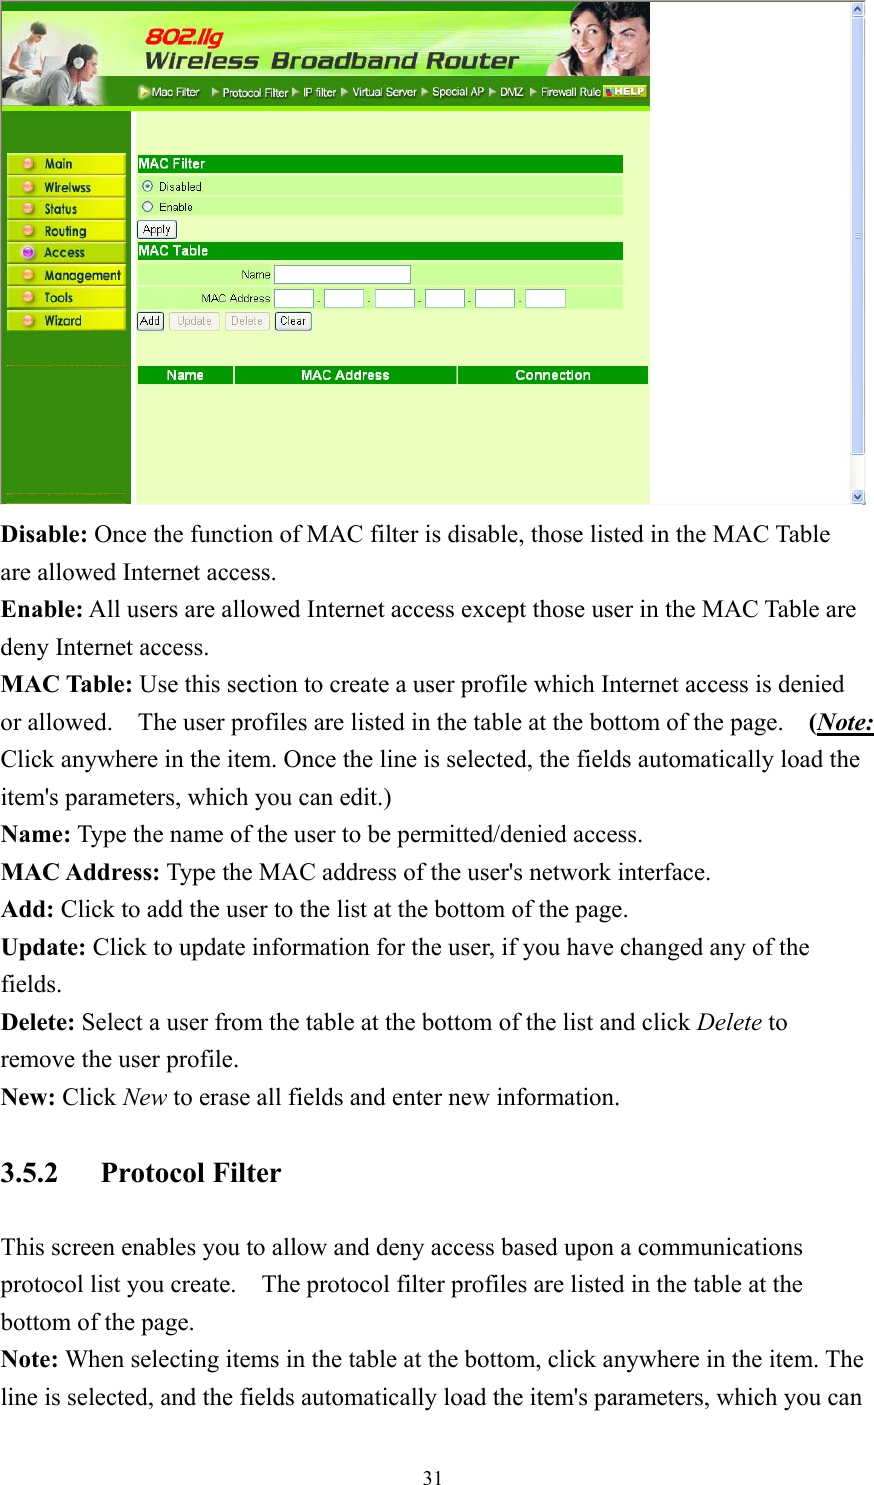  31 Disable: Once the function of MAC filter is disable, those listed in the MAC Table are allowed Internet access. Enable: All users are allowed Internet access except those user in the MAC Table are deny Internet access. MAC Table: Use this section to create a user profile which Internet access is denied or allowed.    The user profiles are listed in the table at the bottom of the page.    (Note: Click anywhere in the item. Once the line is selected, the fields automatically load the item&apos;s parameters, which you can edit.) Name: Type the name of the user to be permitted/denied access. MAC Address: Type the MAC address of the user&apos;s network interface. Add: Click to add the user to the list at the bottom of the page. Update: Click to update information for the user, if you have changed any of the fields. Delete: Select a user from the table at the bottom of the list and click Delete to remove the user profile. New: Click New to erase all fields and enter new information. 3.5.2 Protocol Filter This screen enables you to allow and deny access based upon a communications protocol list you create.    The protocol filter profiles are listed in the table at the bottom of the page. Note: When selecting items in the table at the bottom, click anywhere in the item. The line is selected, and the fields automatically load the item&apos;s parameters, which you can 